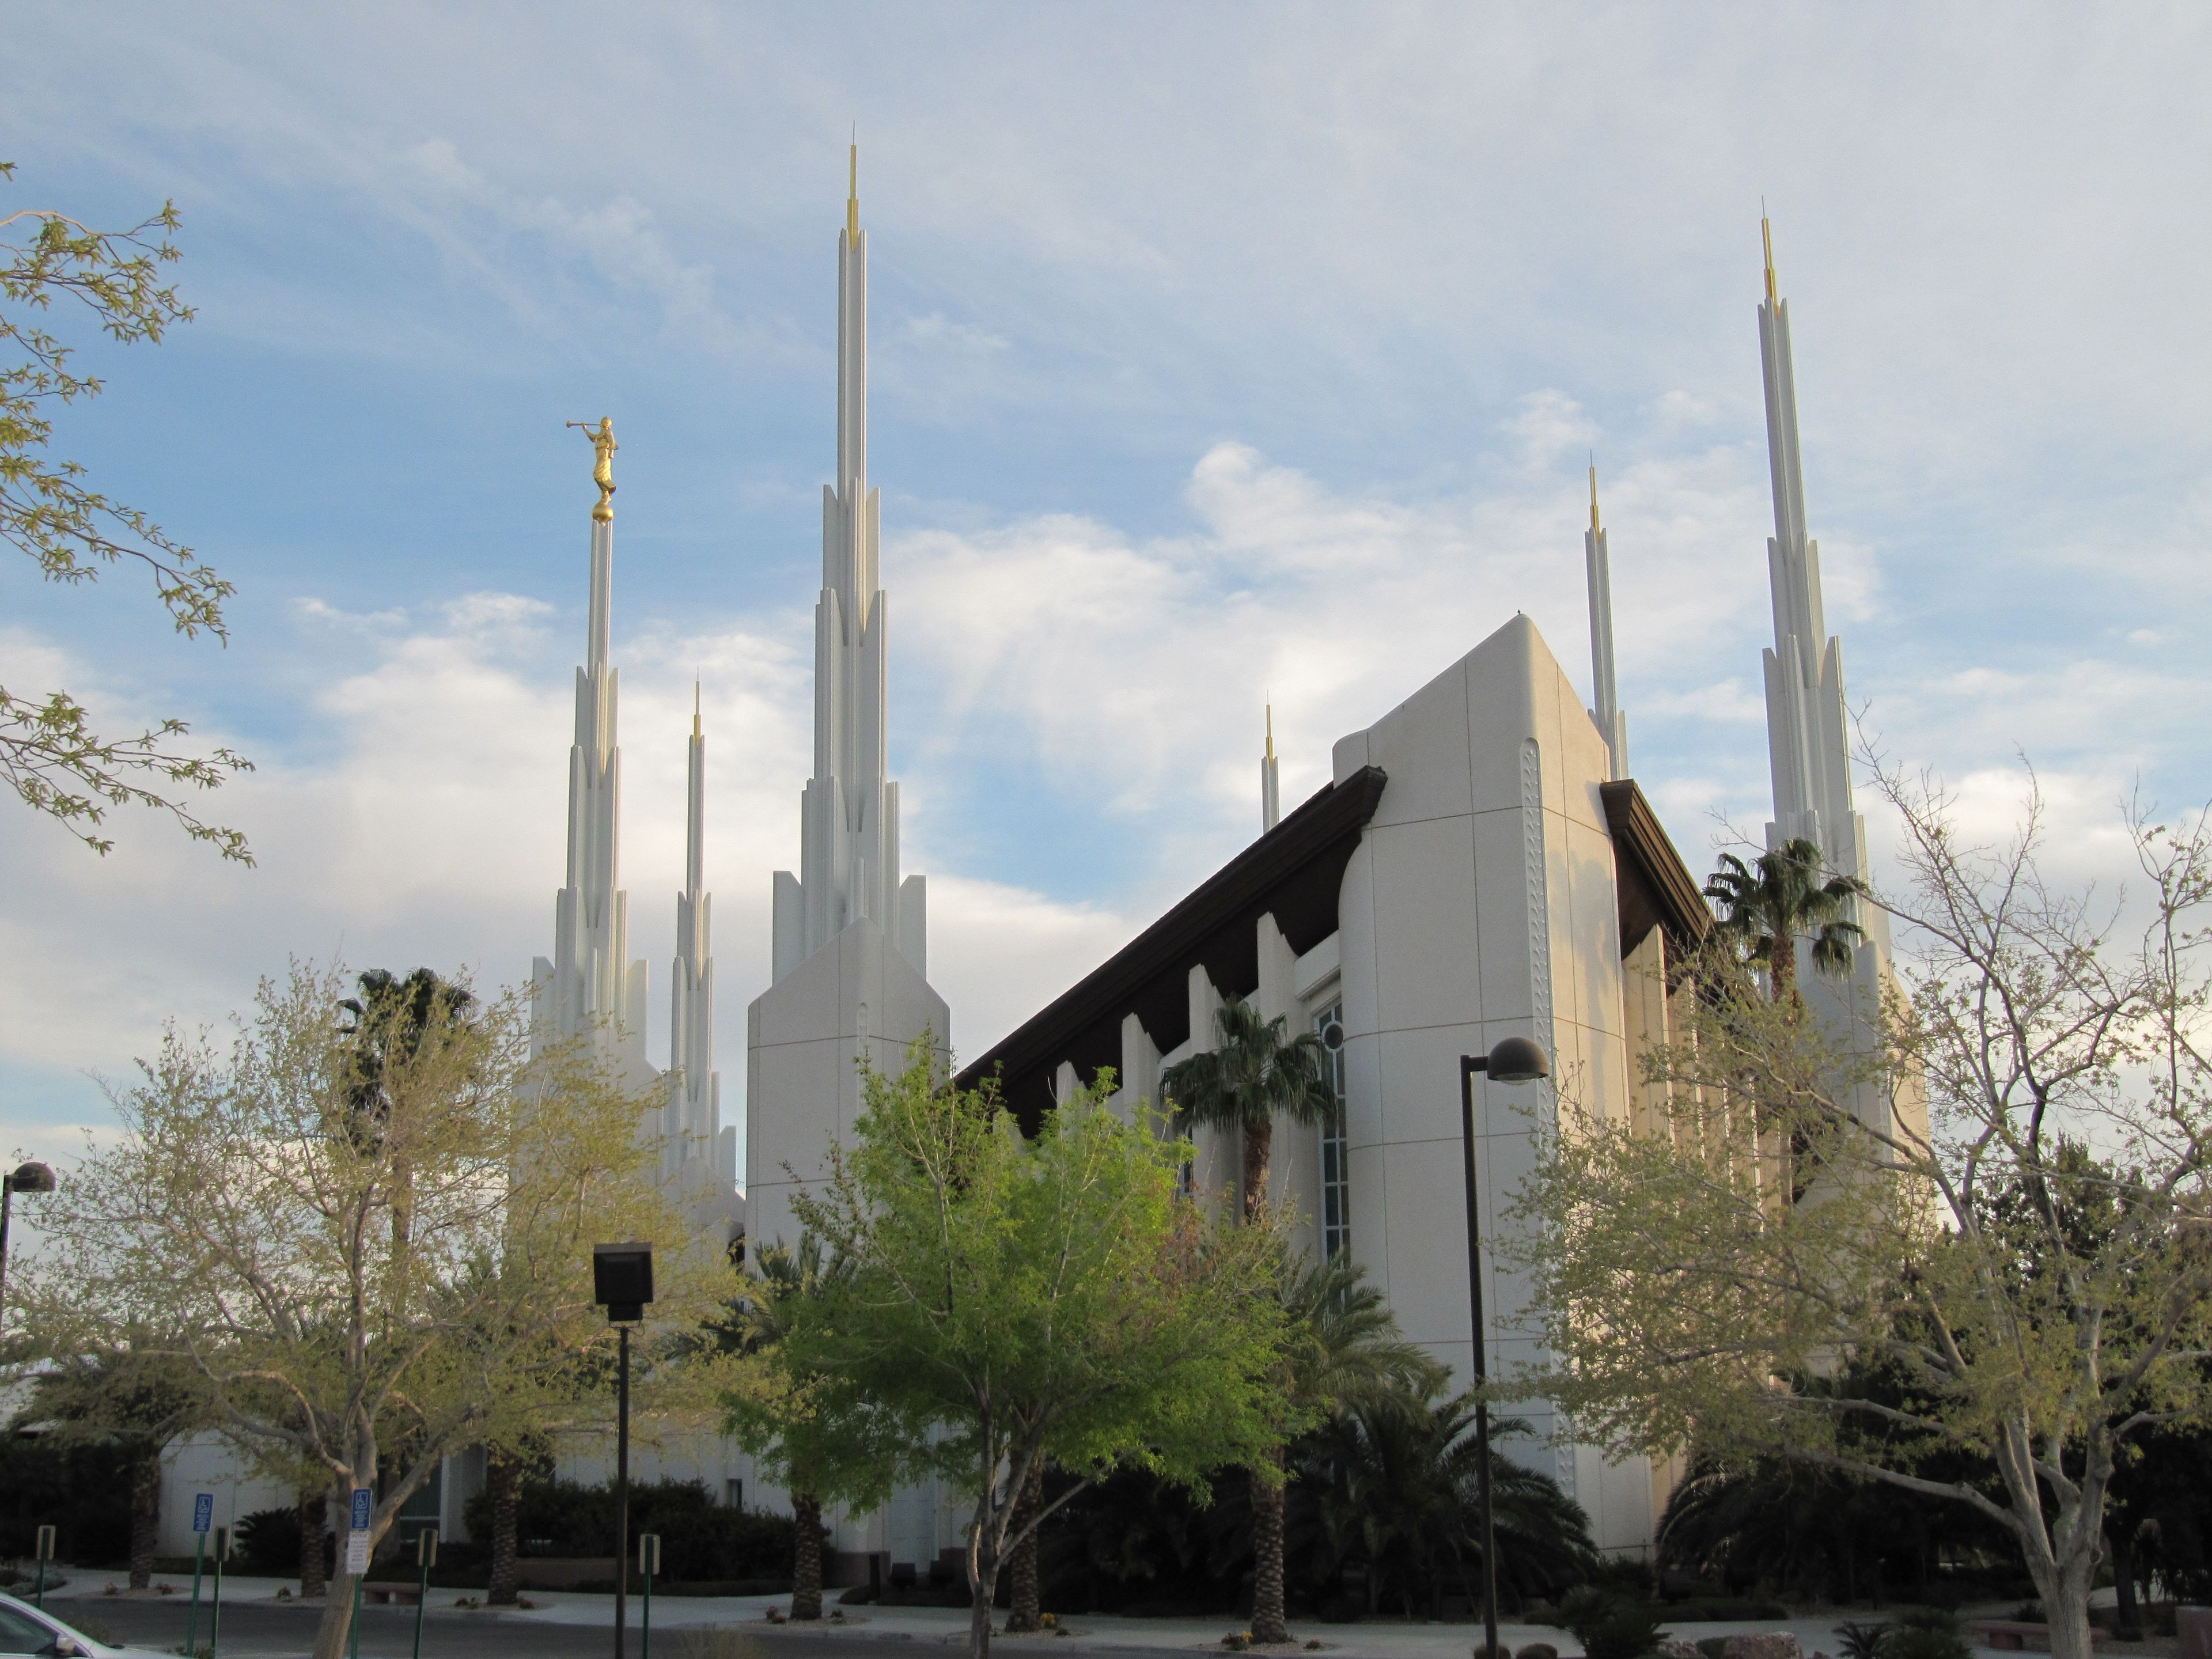 The entire view of the Las Vegas Nevada Temple, including scenery.